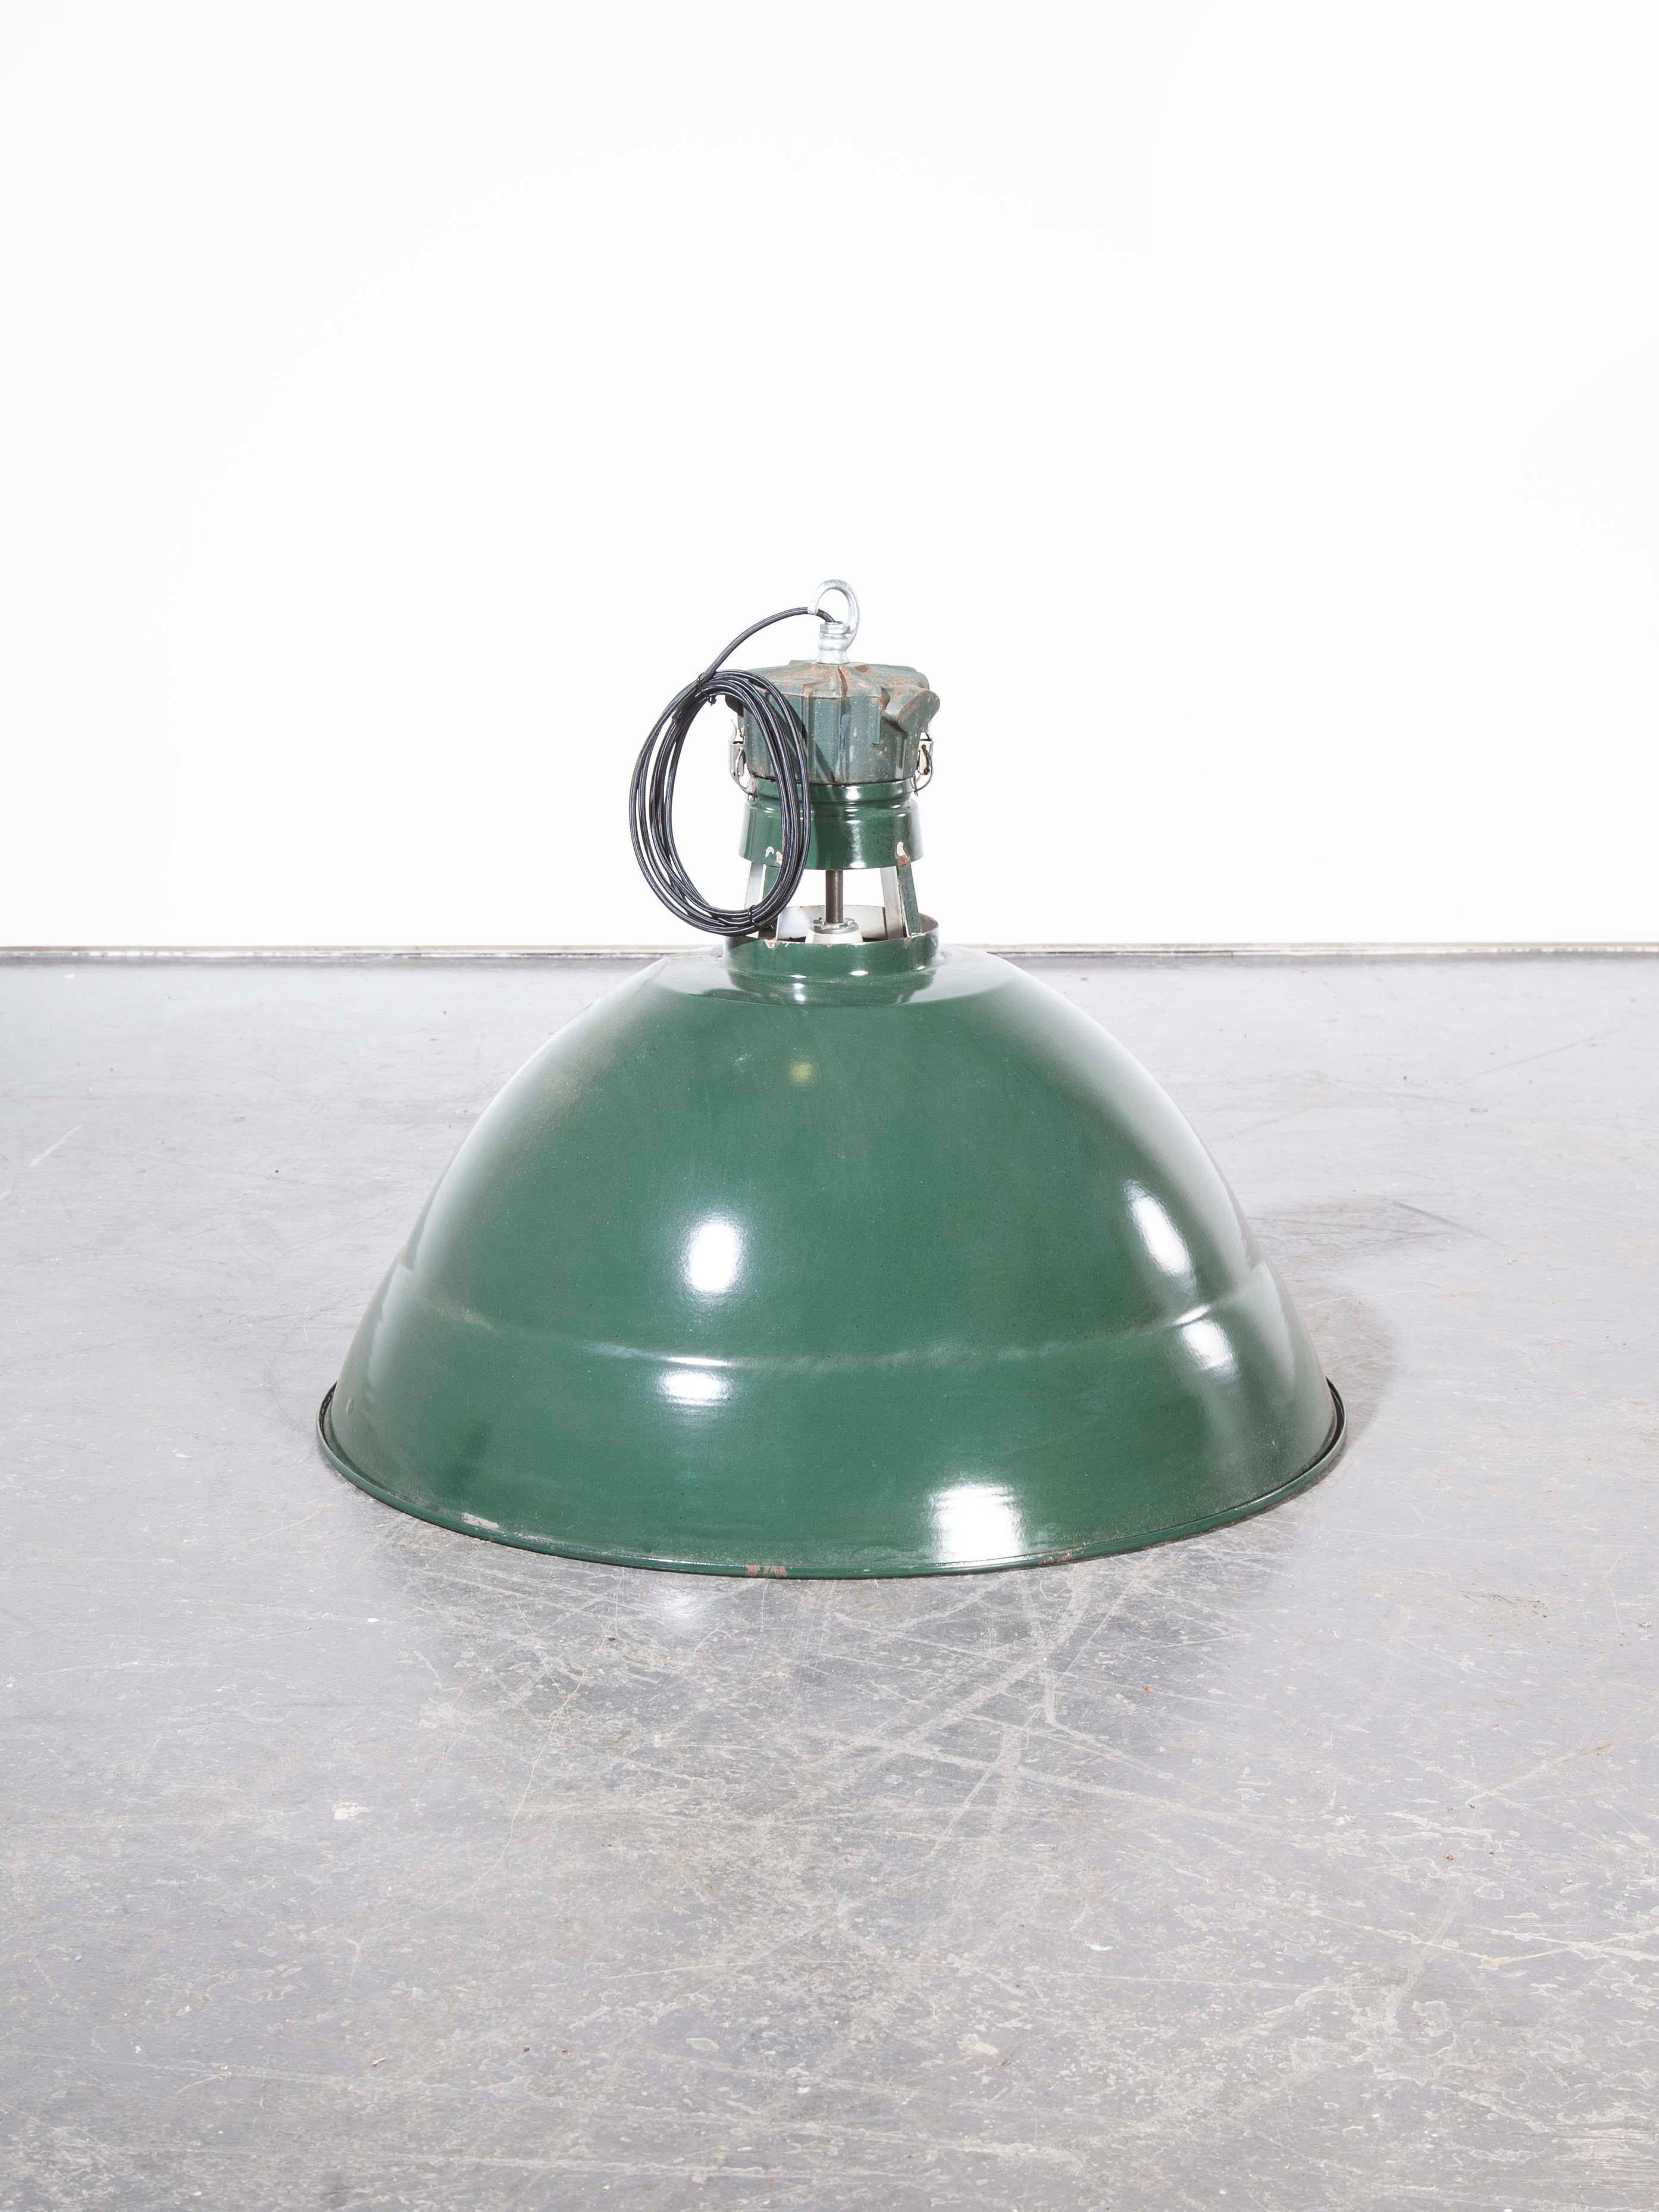 1950s very large industrial green French enamel ceiling pendant lamps/light shades – Sammode. Founded in 1927 by Louis Lemaire in Châtillon-sur-Saône, Sammode was the preminent industrial lamp manufacturer of France. These lamps were a mainstay of